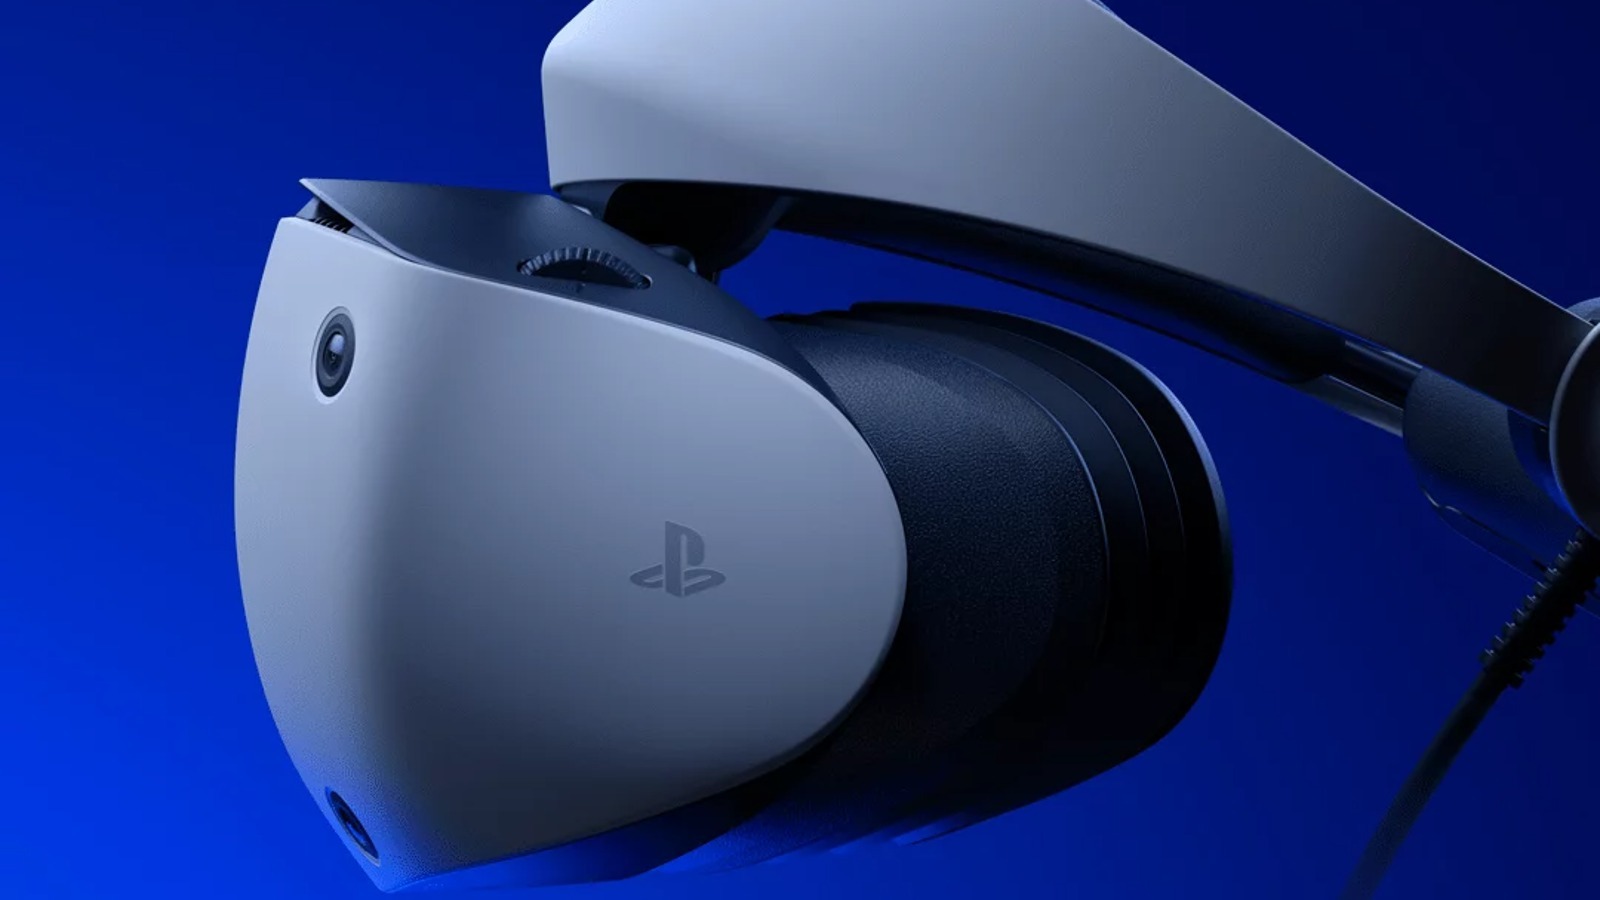 PSVR 2 review: the best premium VR headset around - Video Games on